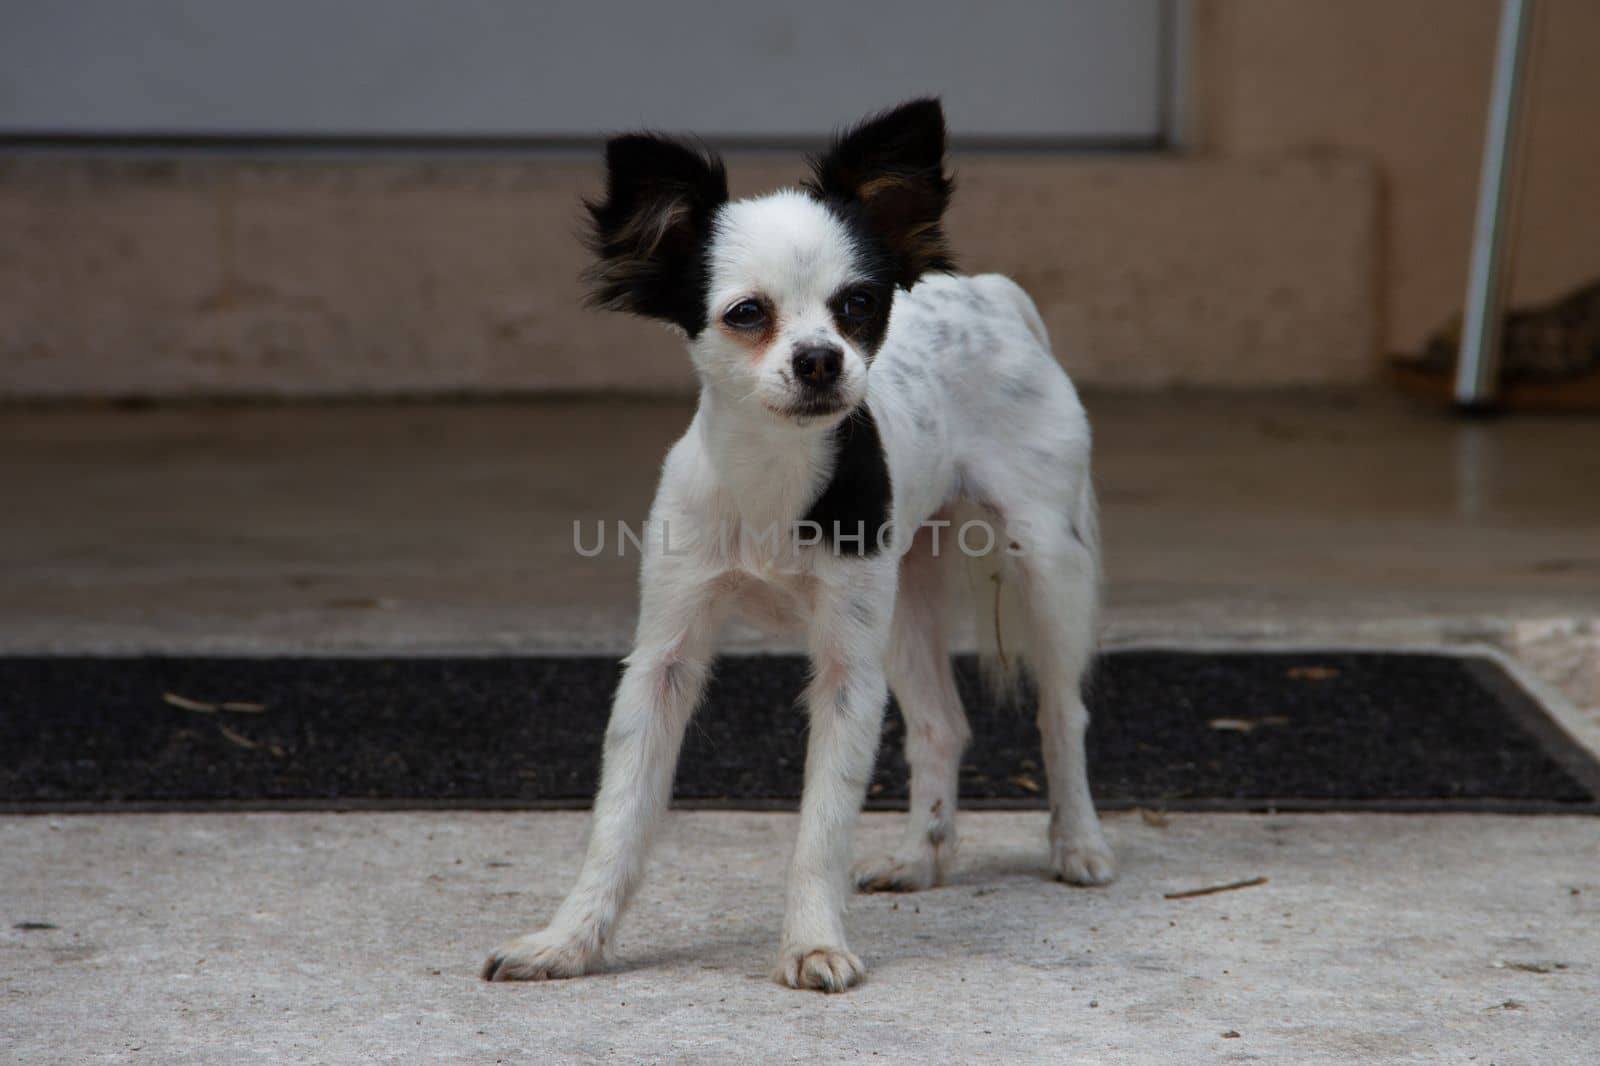 Small black and white terrier type dog standing on cement with ears perked and staring by Granchinho